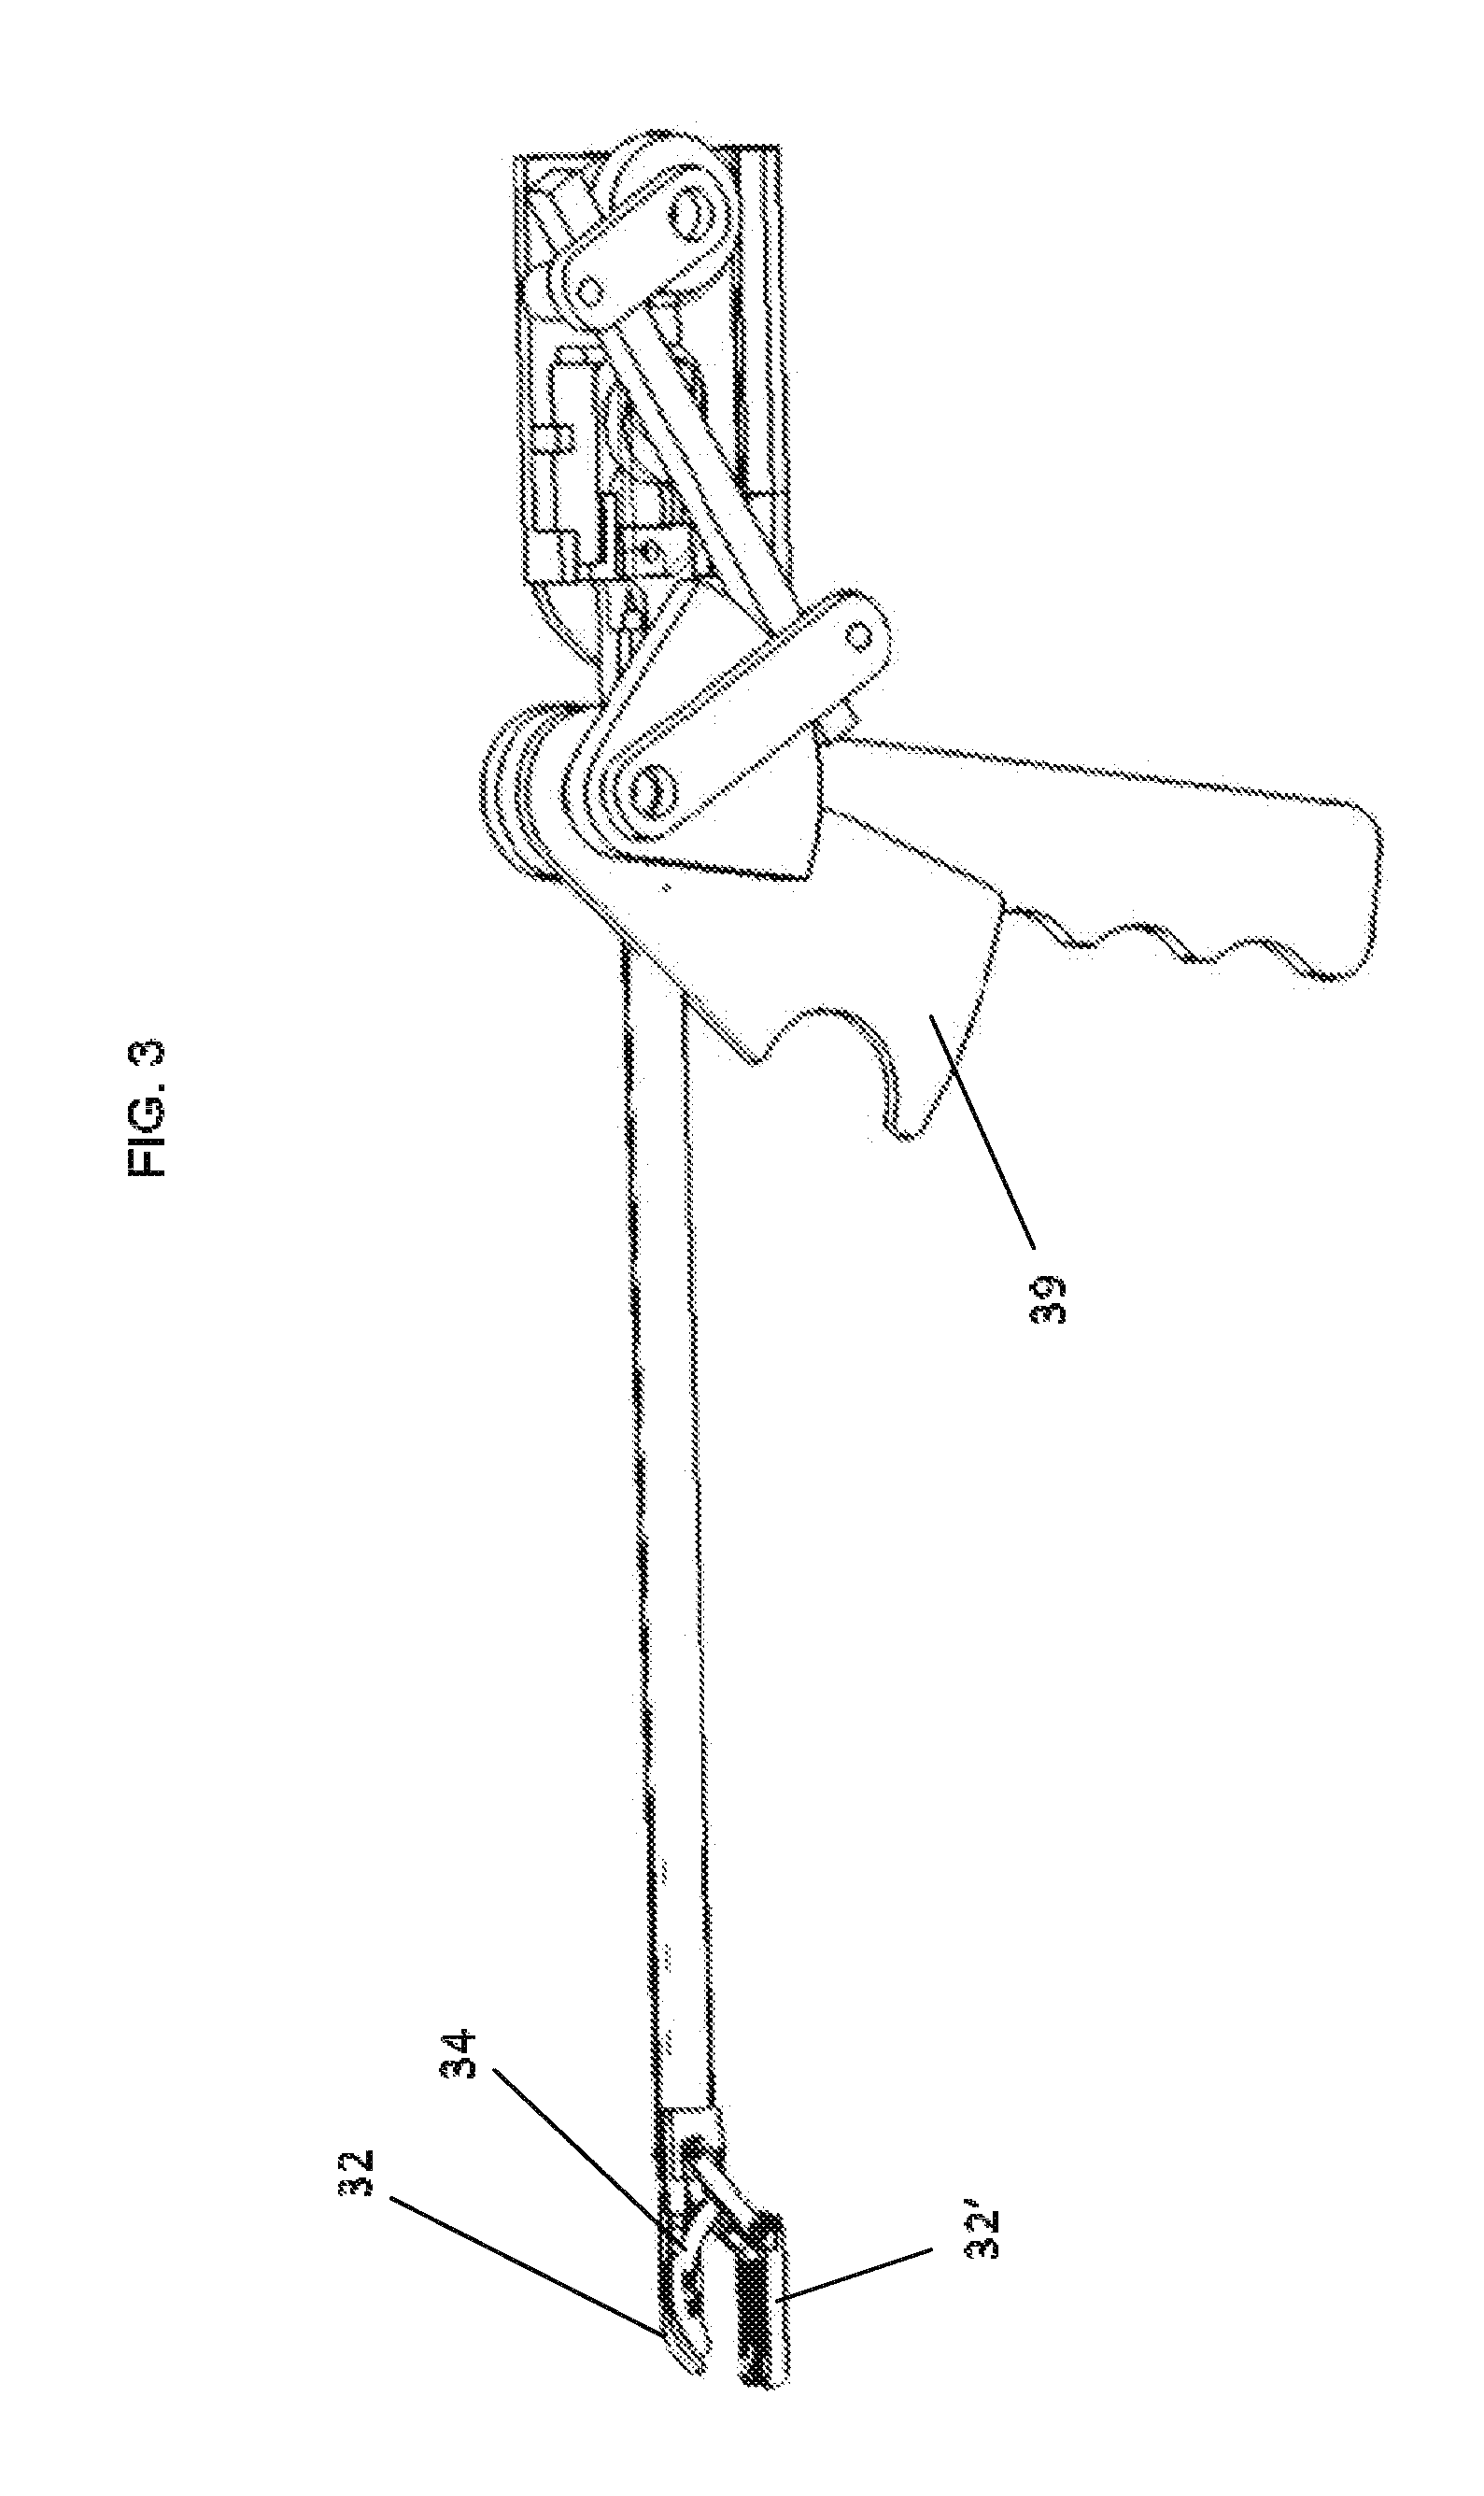 Methods for continuous suture passing